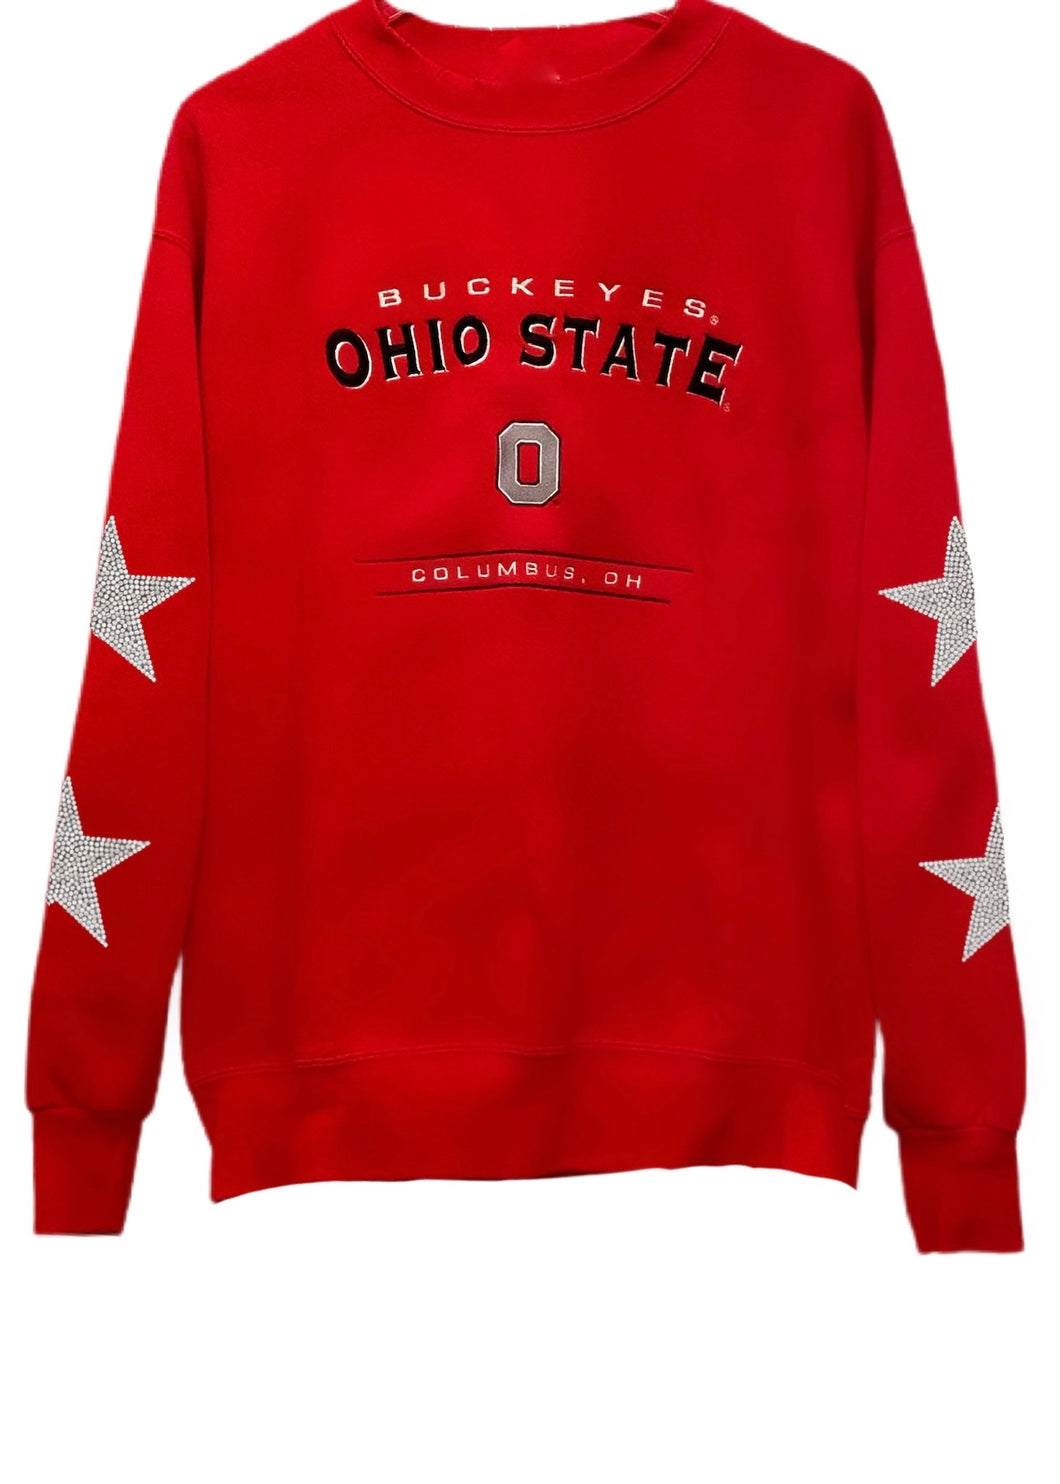 Ohio State University, One of a KIND Vintage Sweatshirt with Crystal Star Design